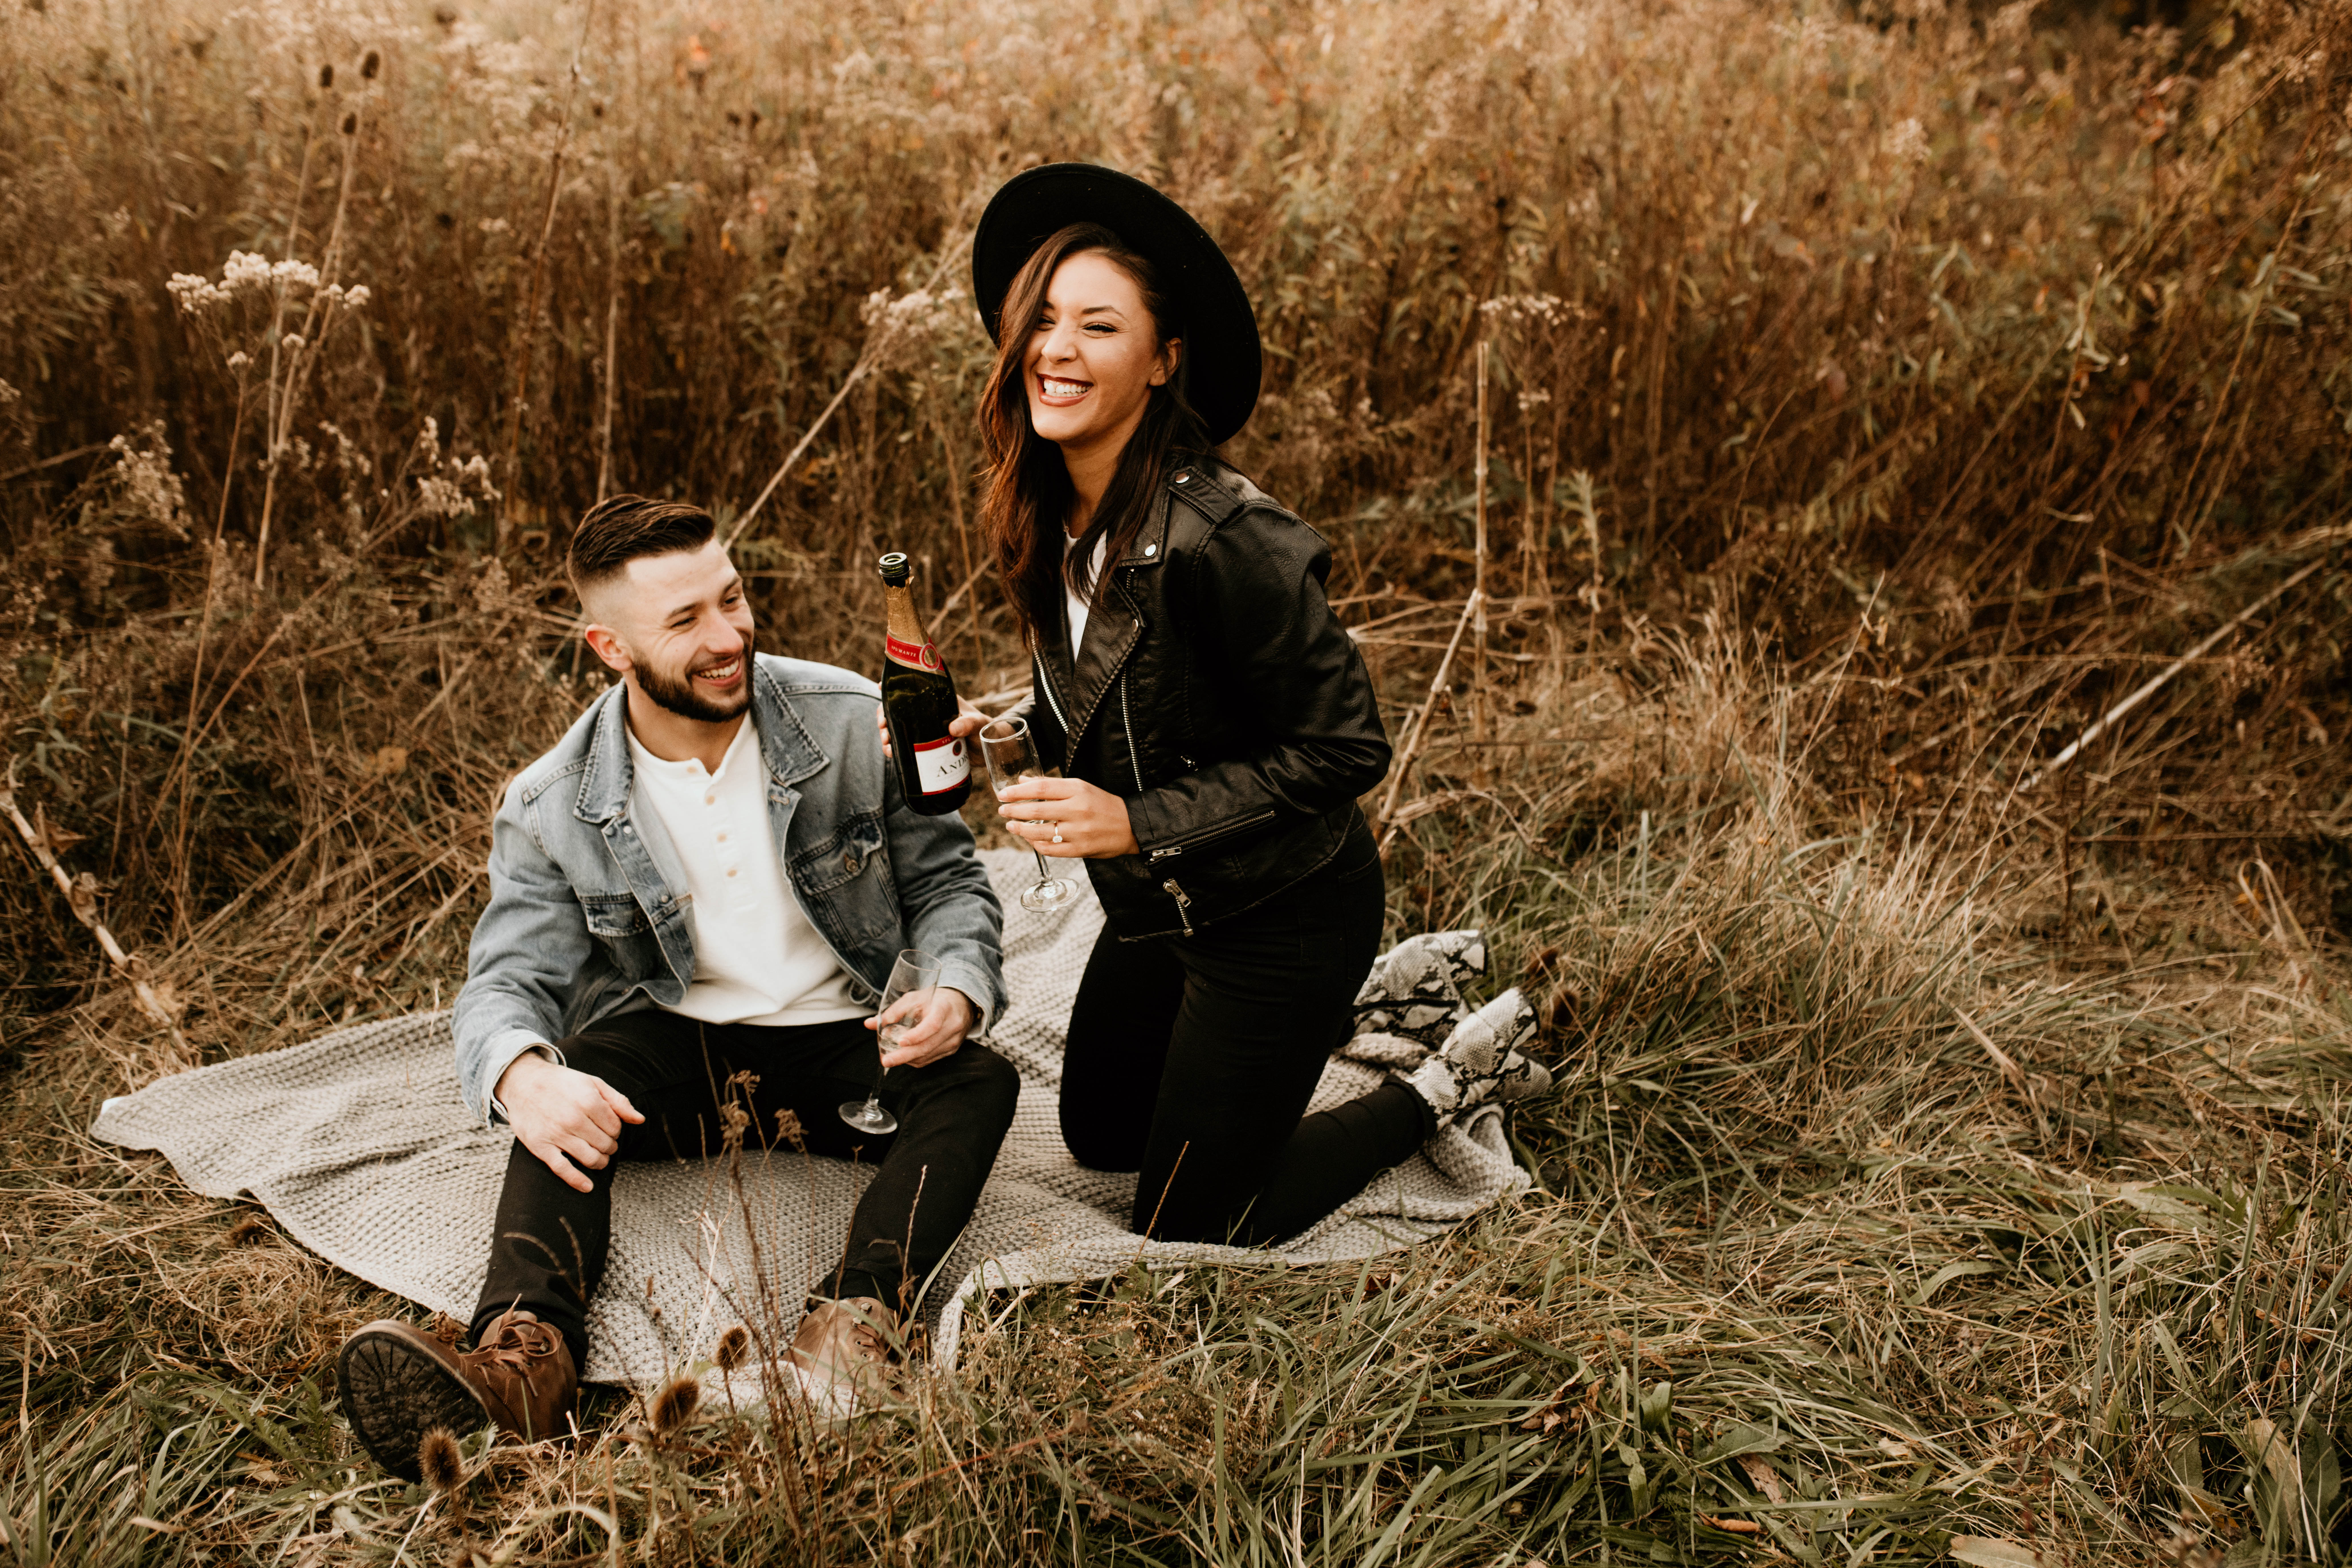 Edgy Engagement Style, Man wearing jean jacket and Woman black leather jacket and hat sitting on blanket with wine.